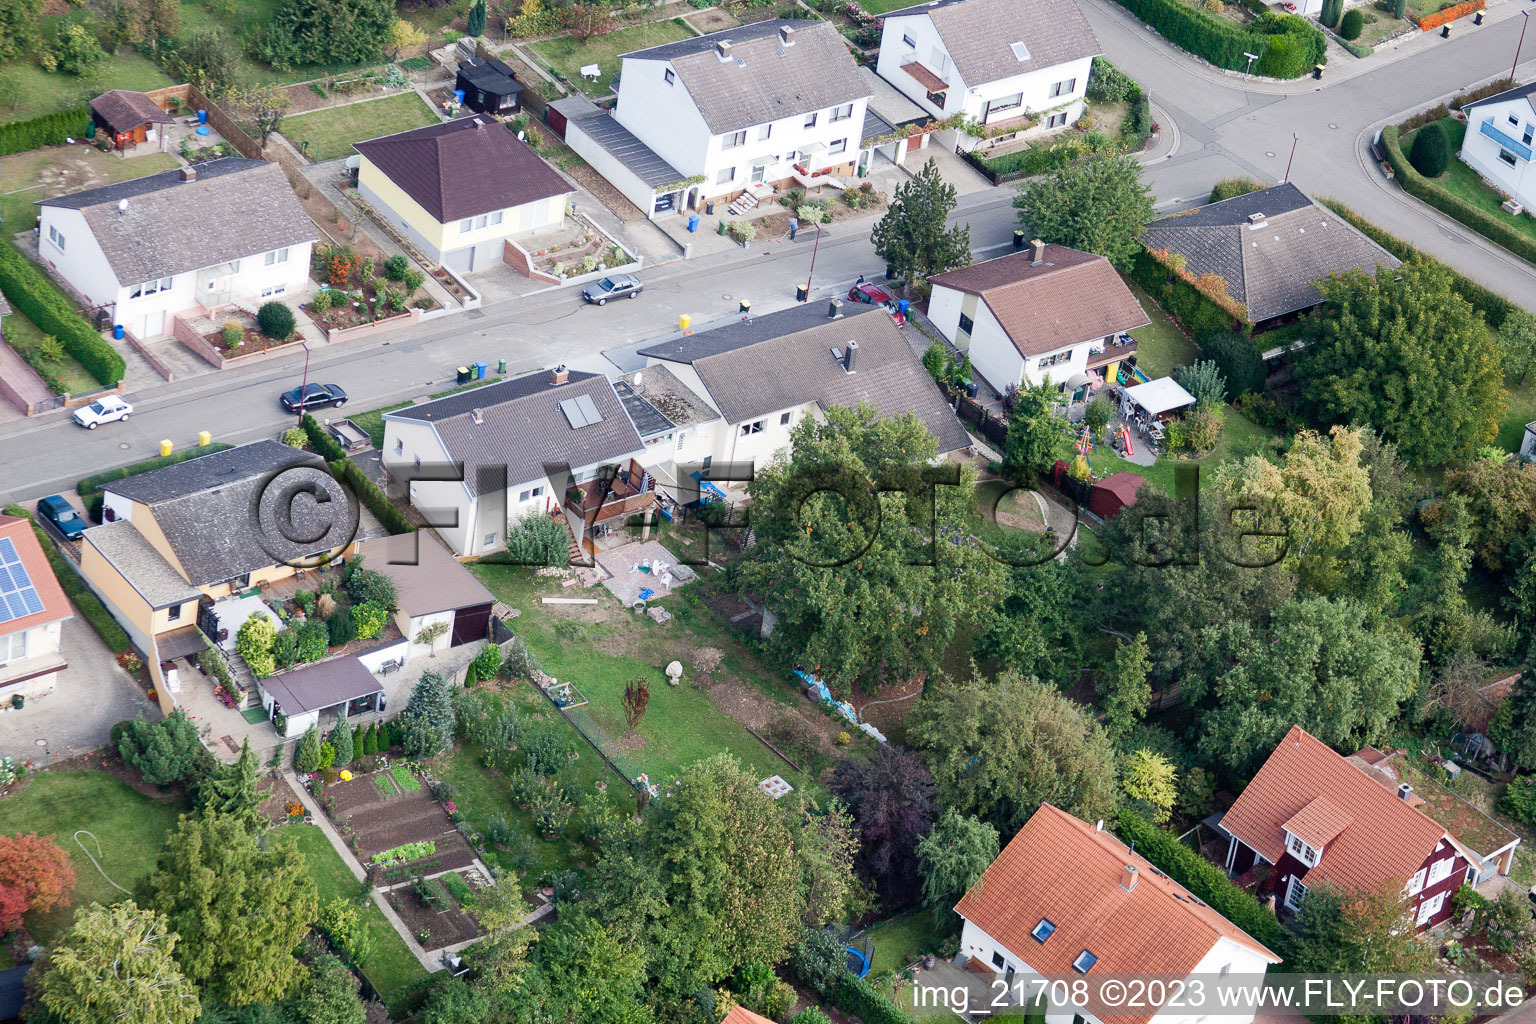 In the mill garden in Eppelsheim in the state Rhineland-Palatinate, Germany from above